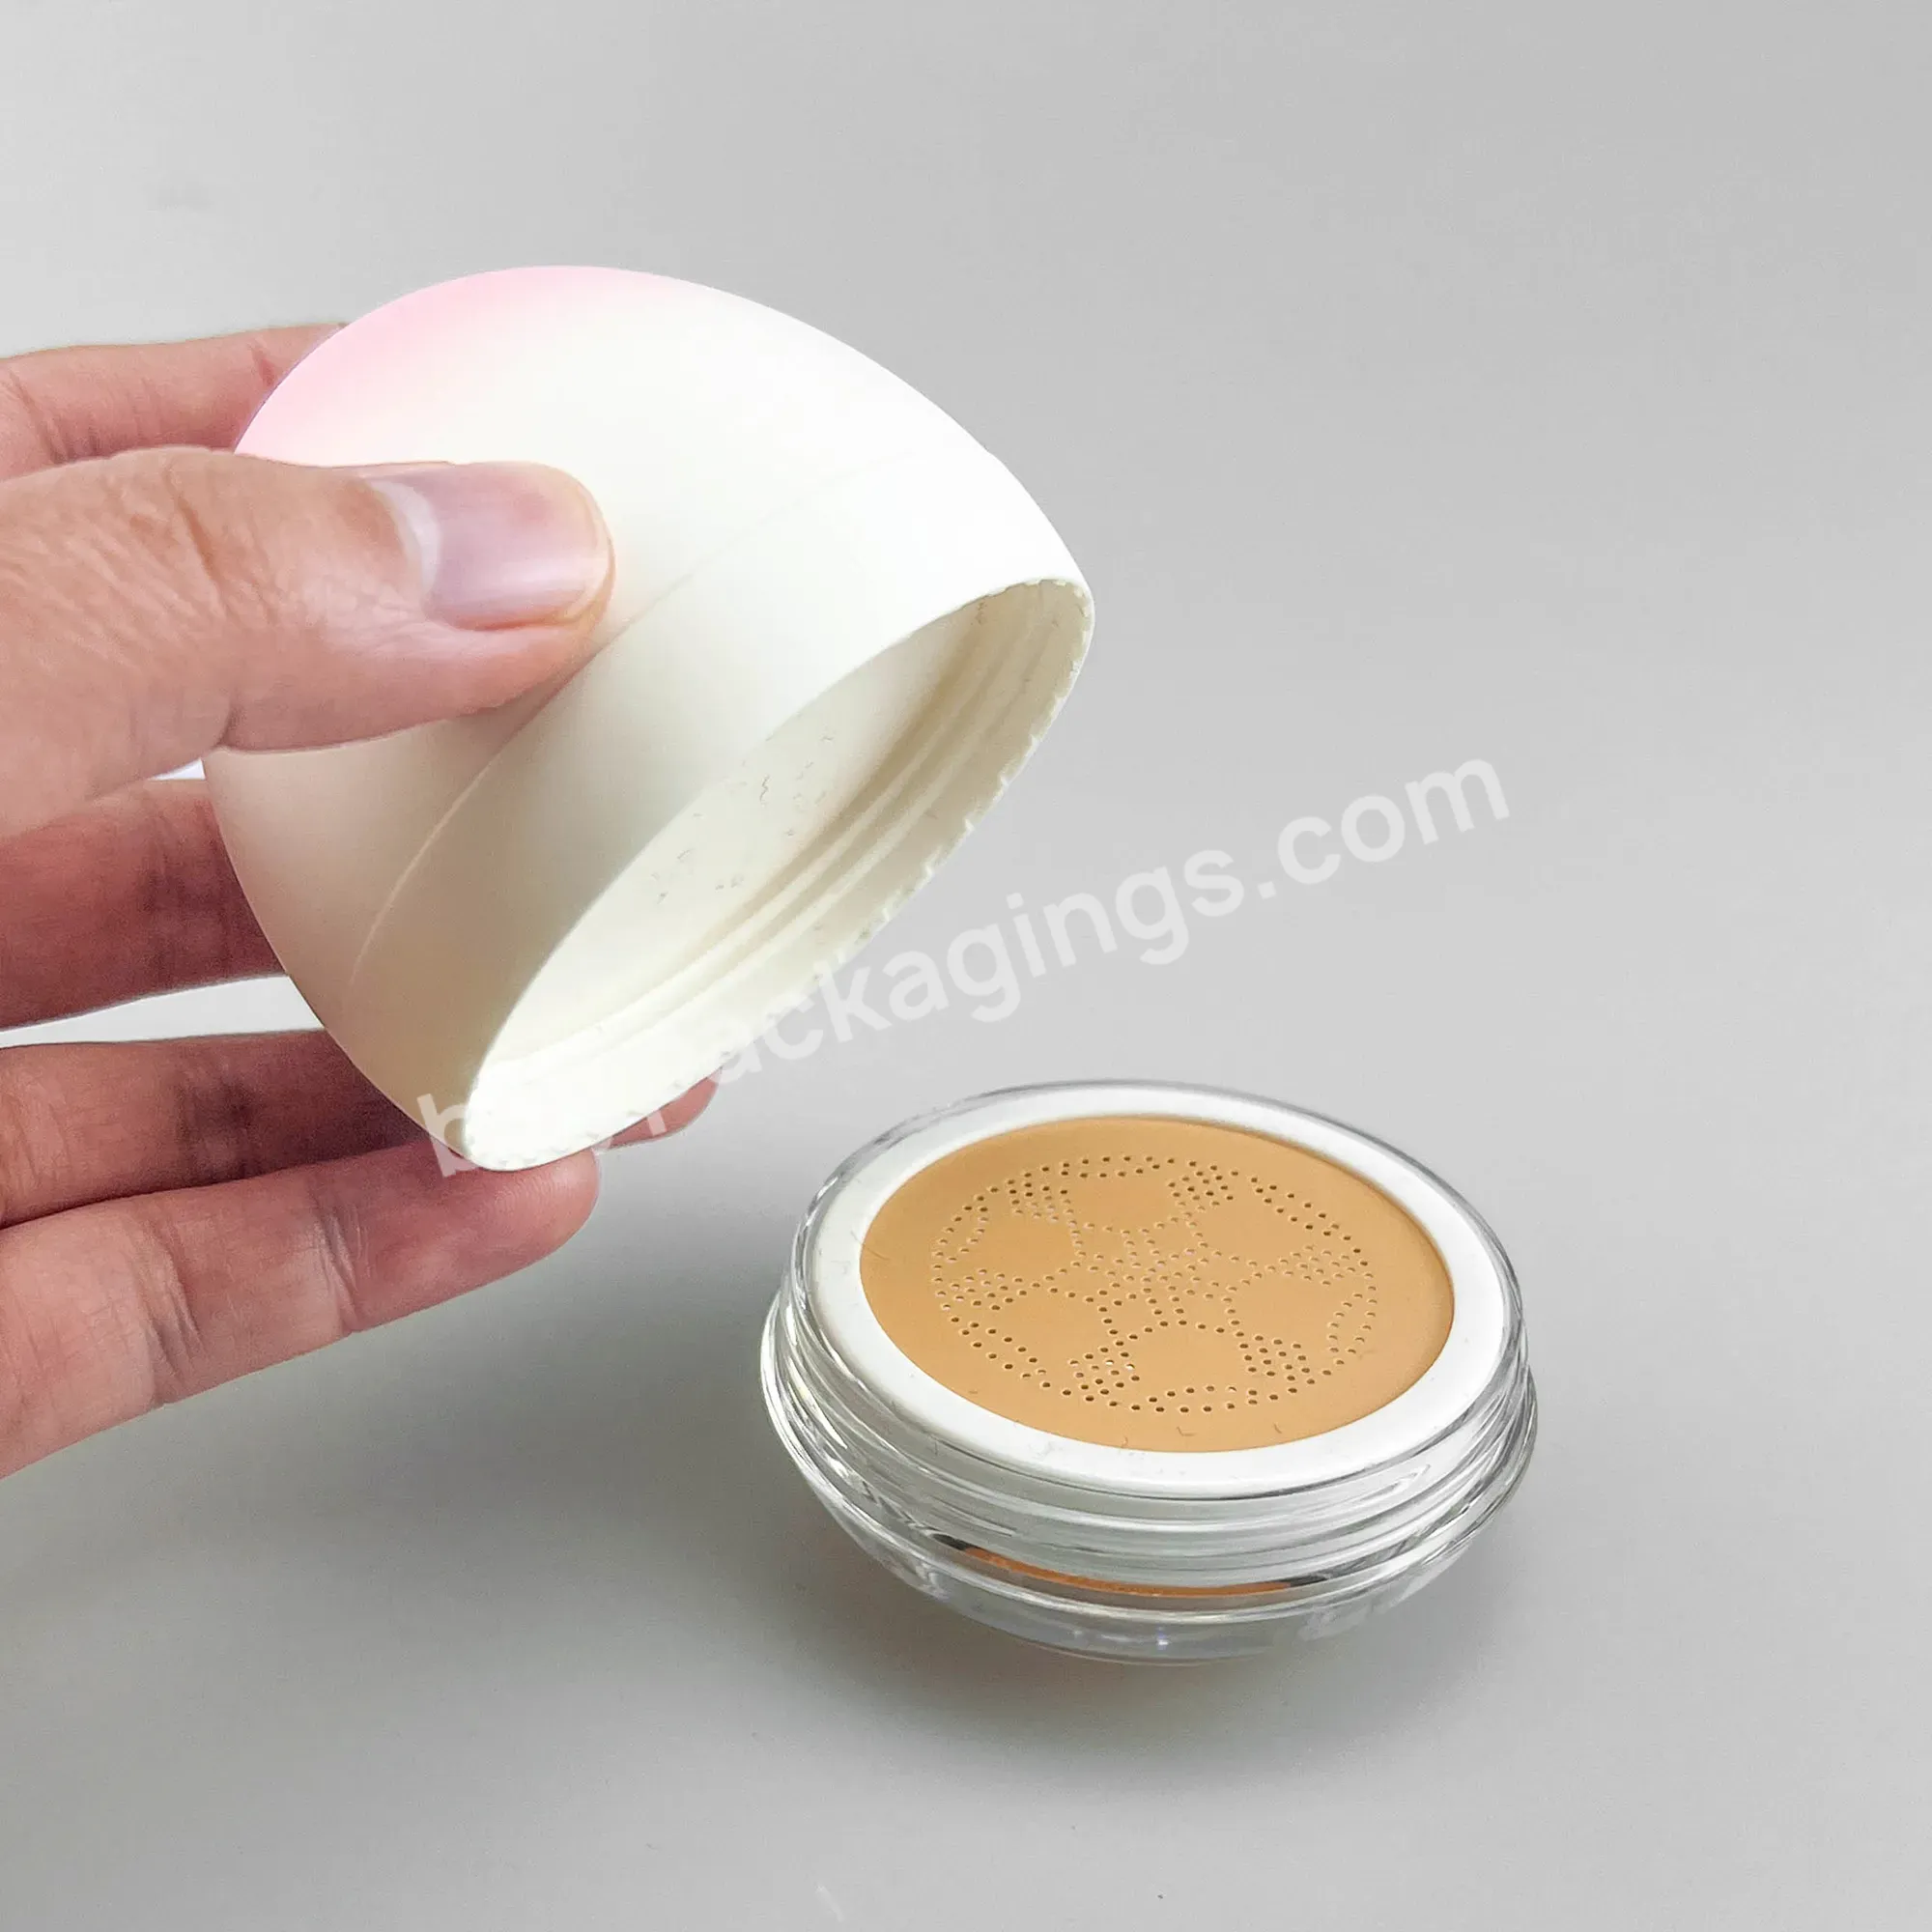 Refillable Air Cushion Foundation Case Egg Shaped Liquid Foundation Long Lasting Fast Dry Easy To Wear Face Beauty Makeup - Buy Empty Cushion Foundation Compact Case Empty Air Cushion Foundation Compact Case Egg Shaped Liquid Foundation,Foundation Ma